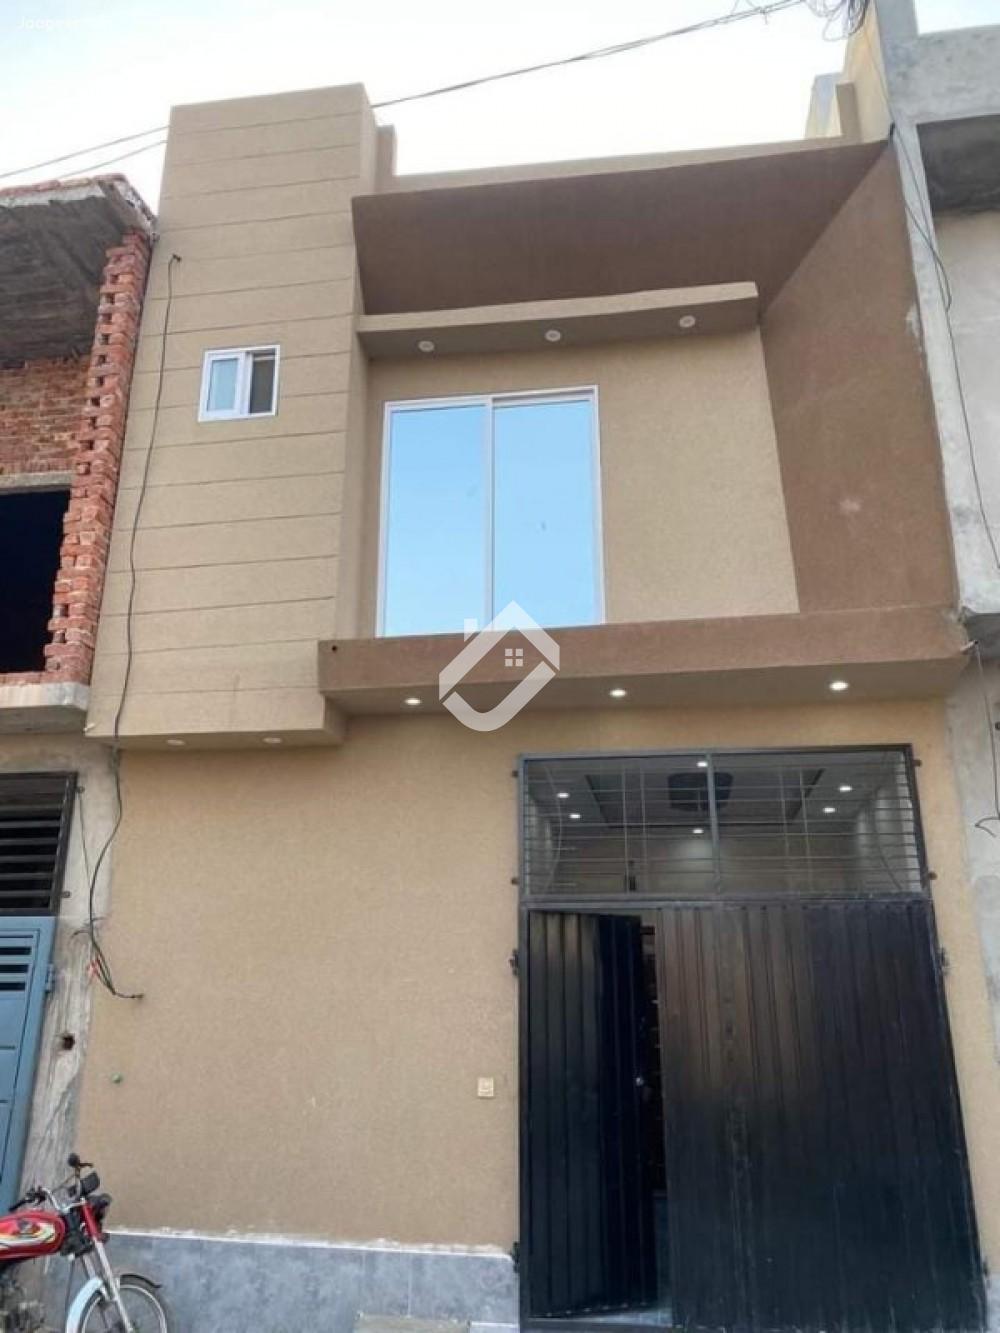 Main image 3 Marla Double Storey House For Sale In Hamza Town Phase-2 Phase-2